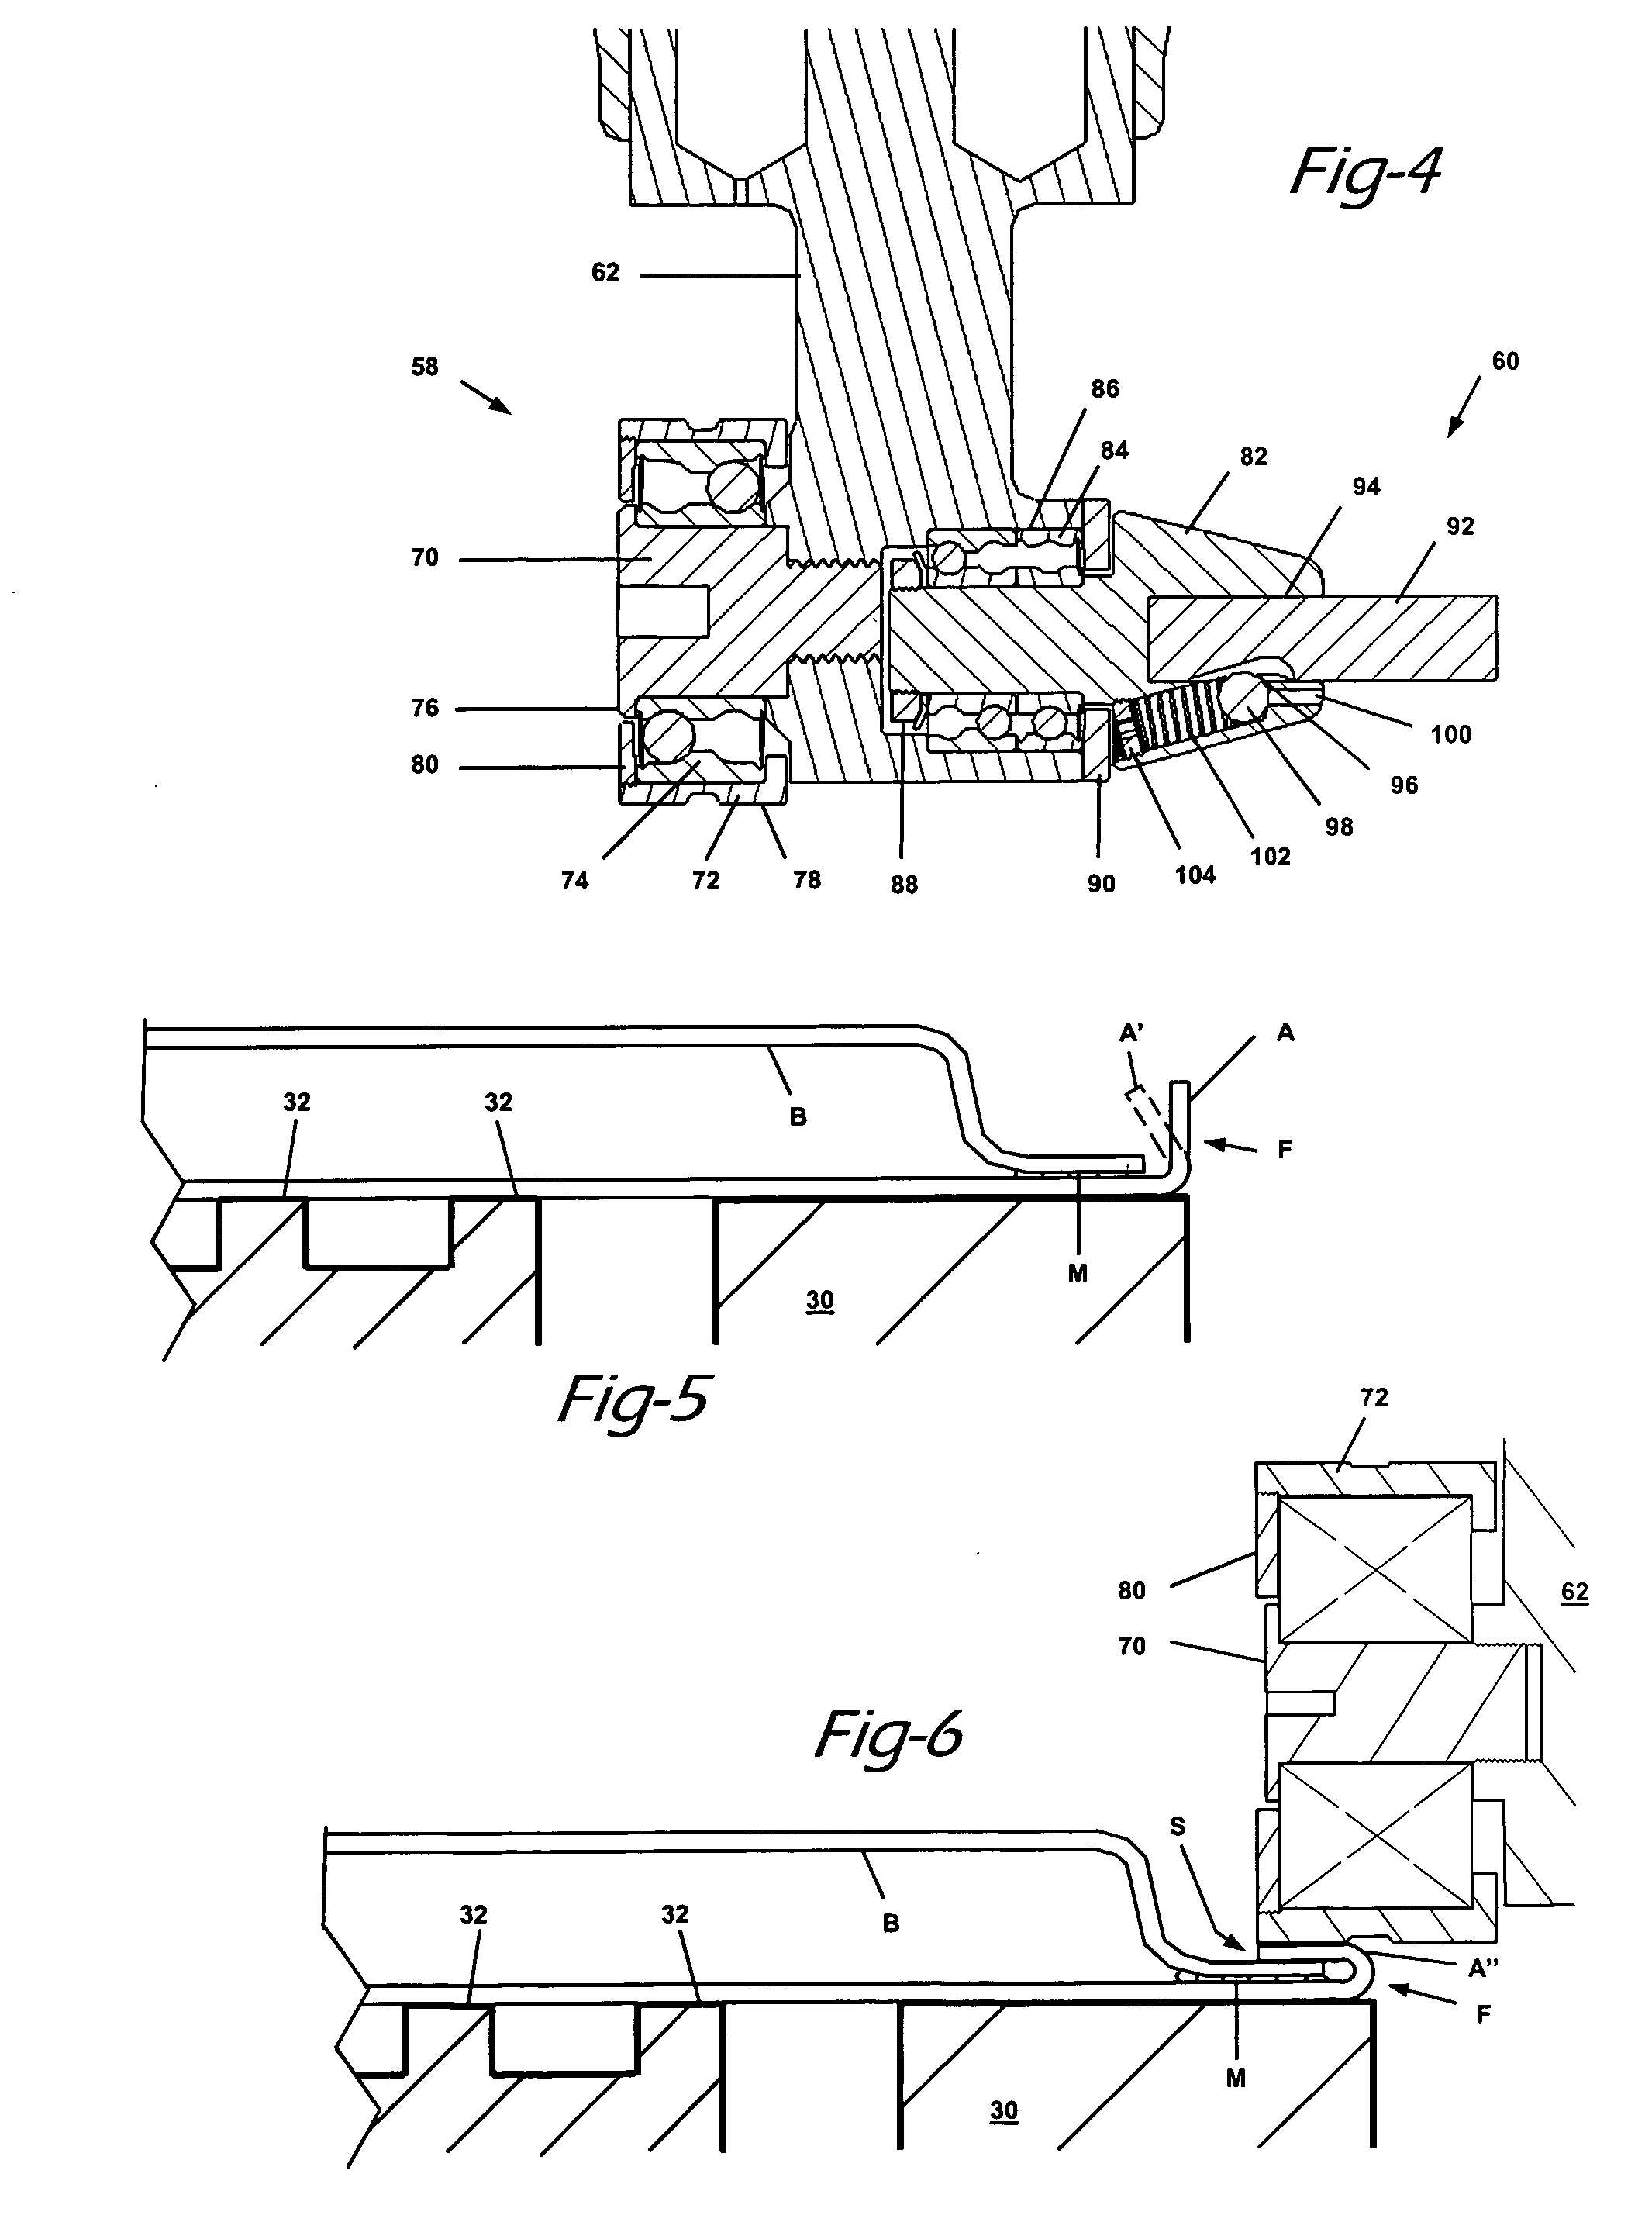 Roller tool and positional pressure method of use for the forming and joining of sheet material